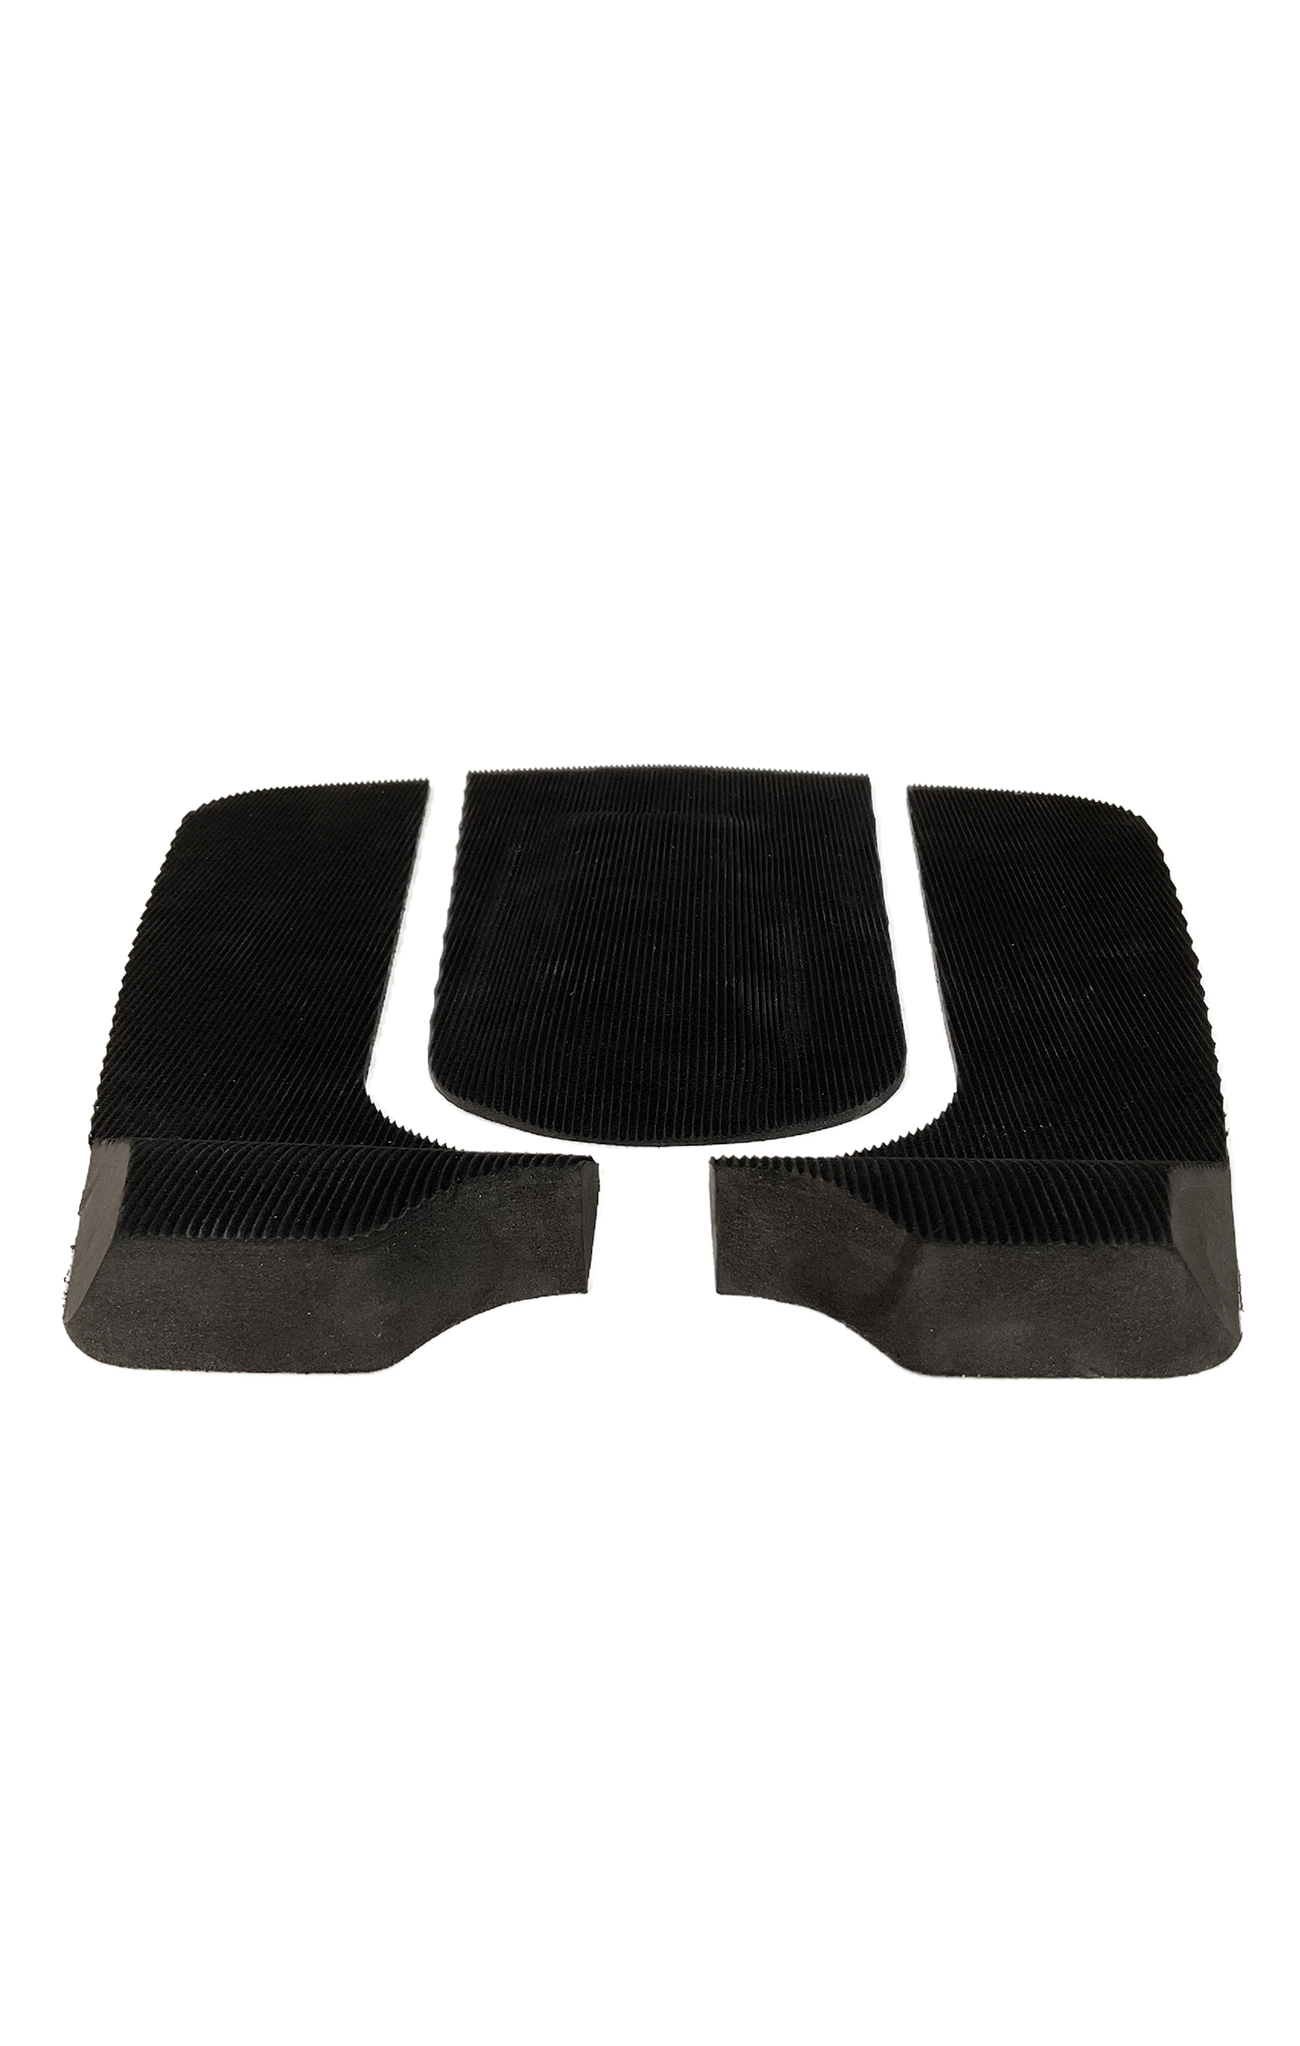 Colby + 3M - 3 Piece Arch Pad